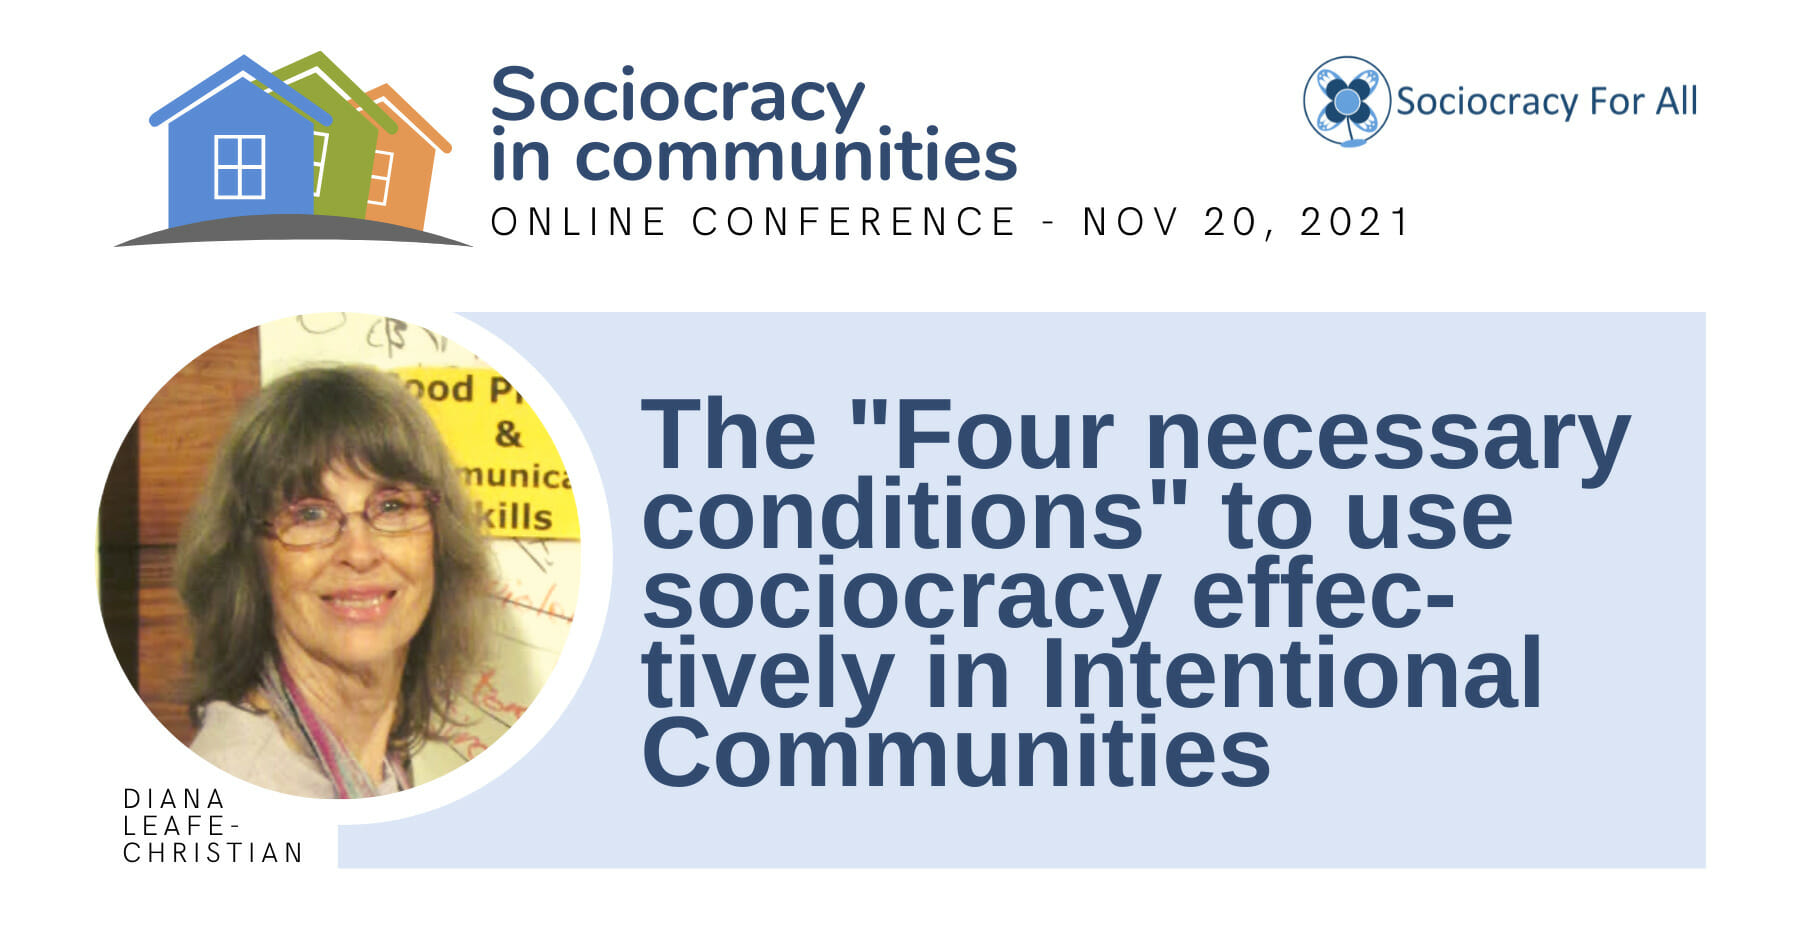 The “Four Necessary Conditions” to Use Sociocracy Effectively in Intentional Communities (Diana Leafe Christian)